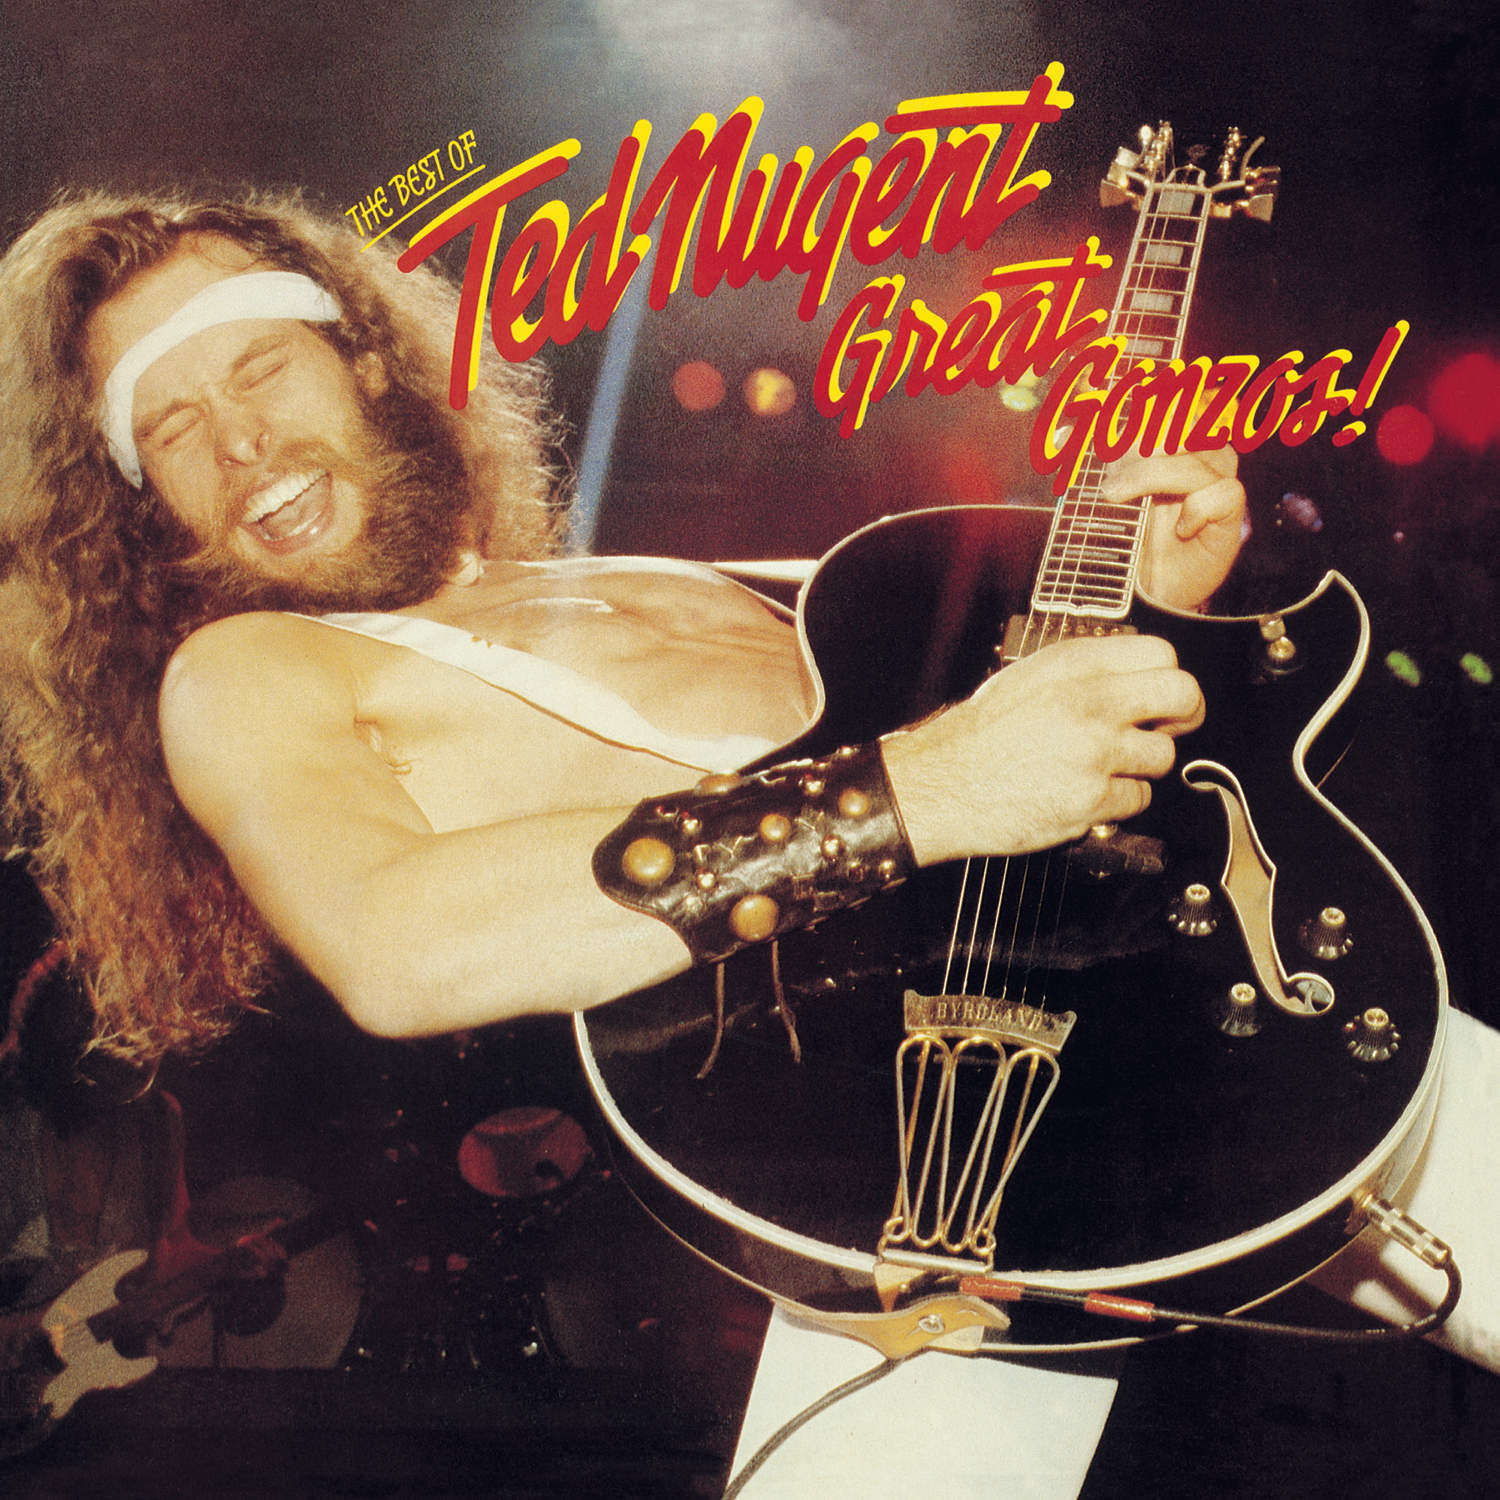 GREAT GONZOS – THE BEST OF TED NUGENT